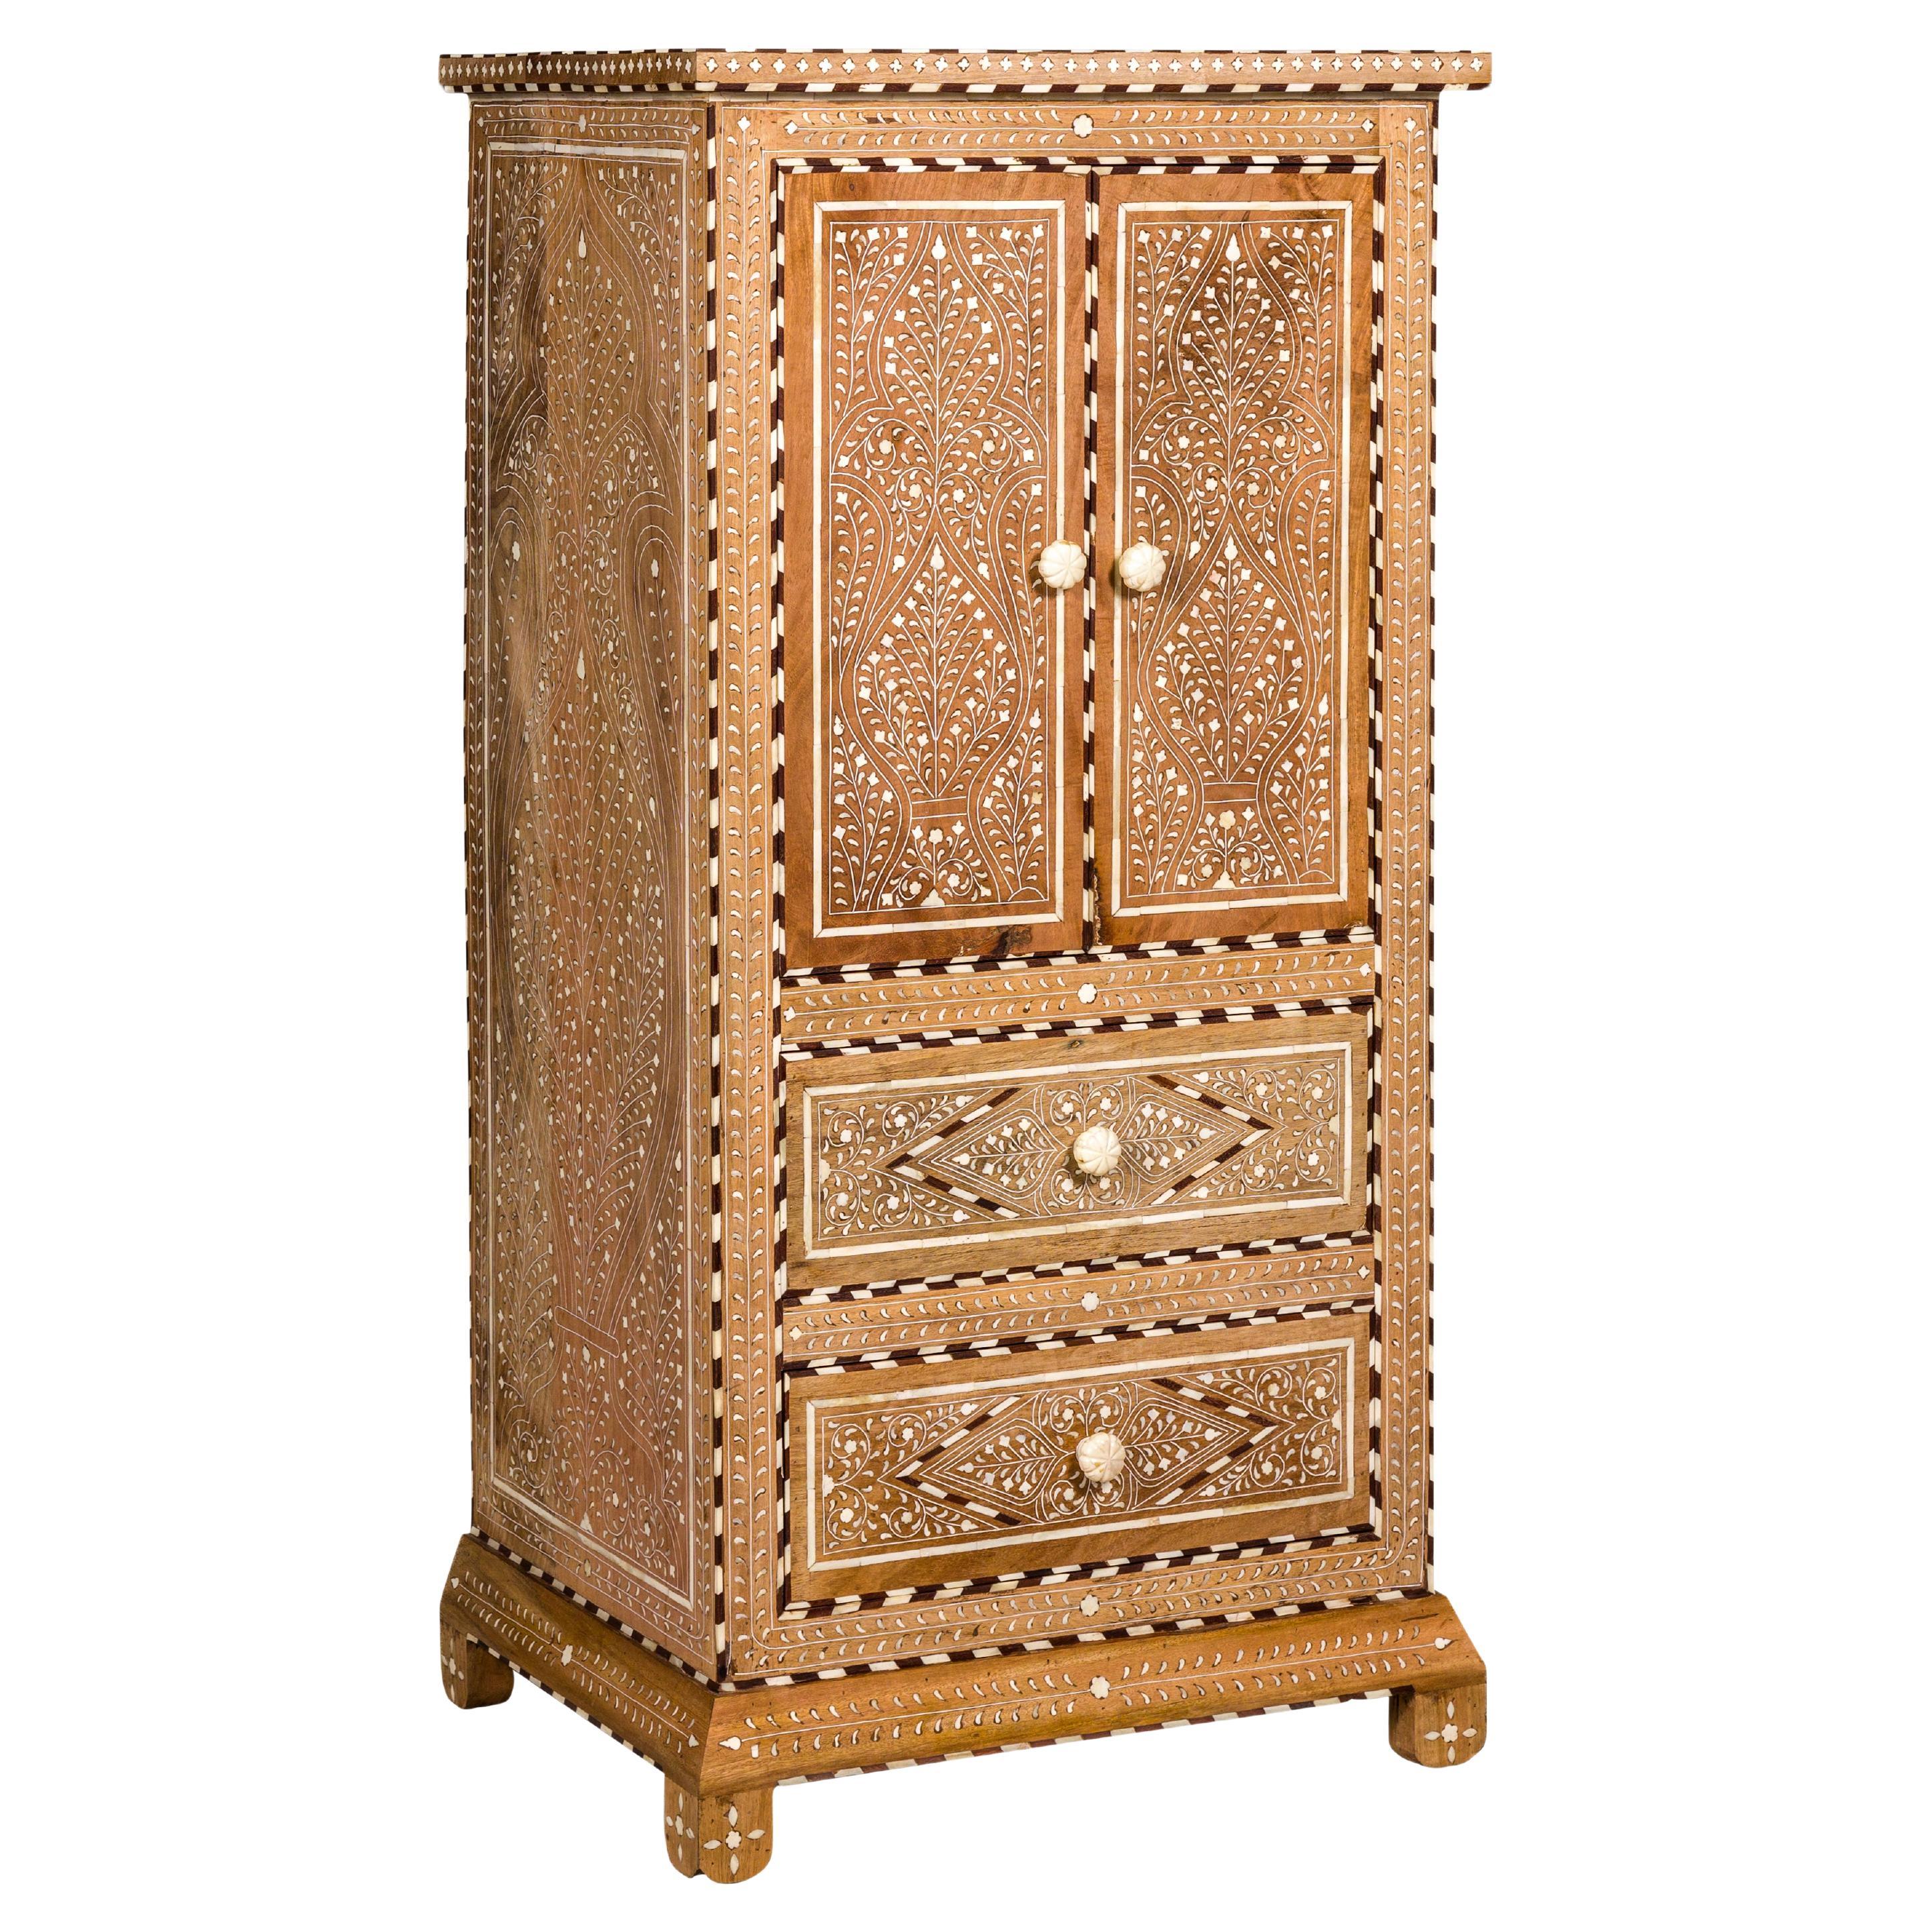 Anglo Indian Style Narrow Cabinet with Foliage-Themed Bone Inlaid Décor